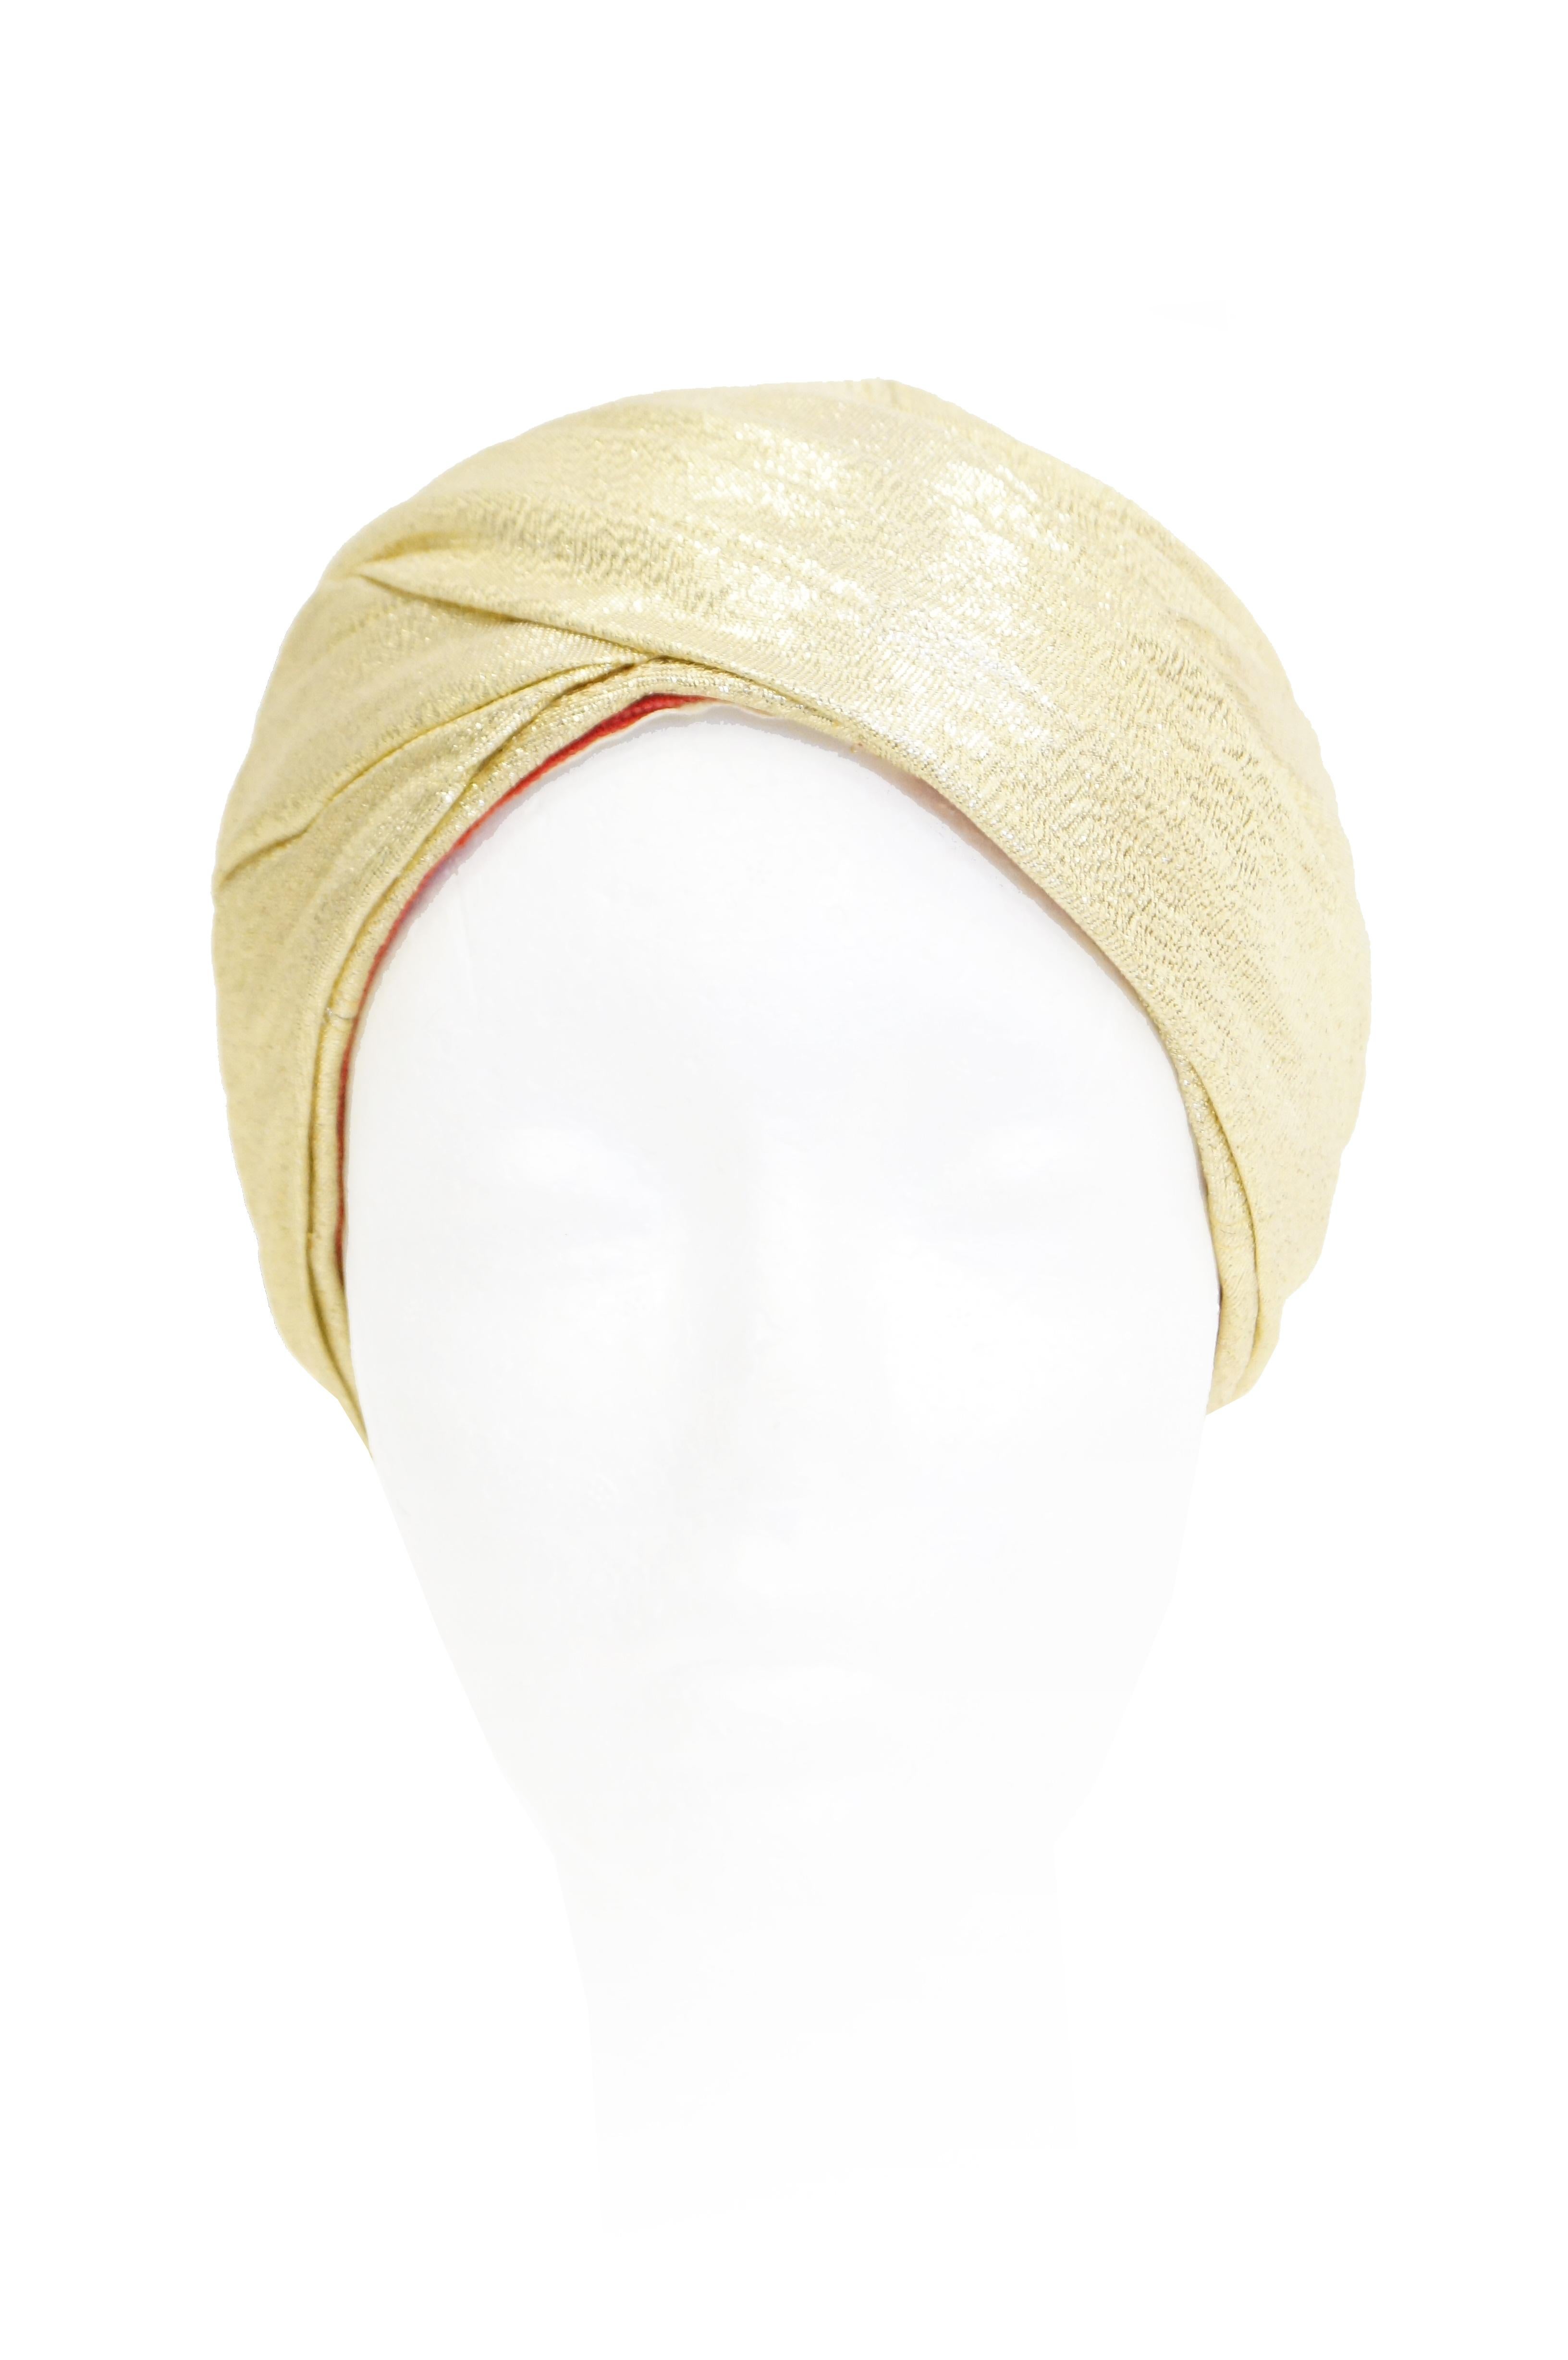 Extremely Rare Gold fabric pleated turban by Avant Garde designer Pierre Cardin.  Extremely well designed and constructed.  Turban can be worn high on the head or pulled down covering the crown. The turban is lined with red fabric and gross grain